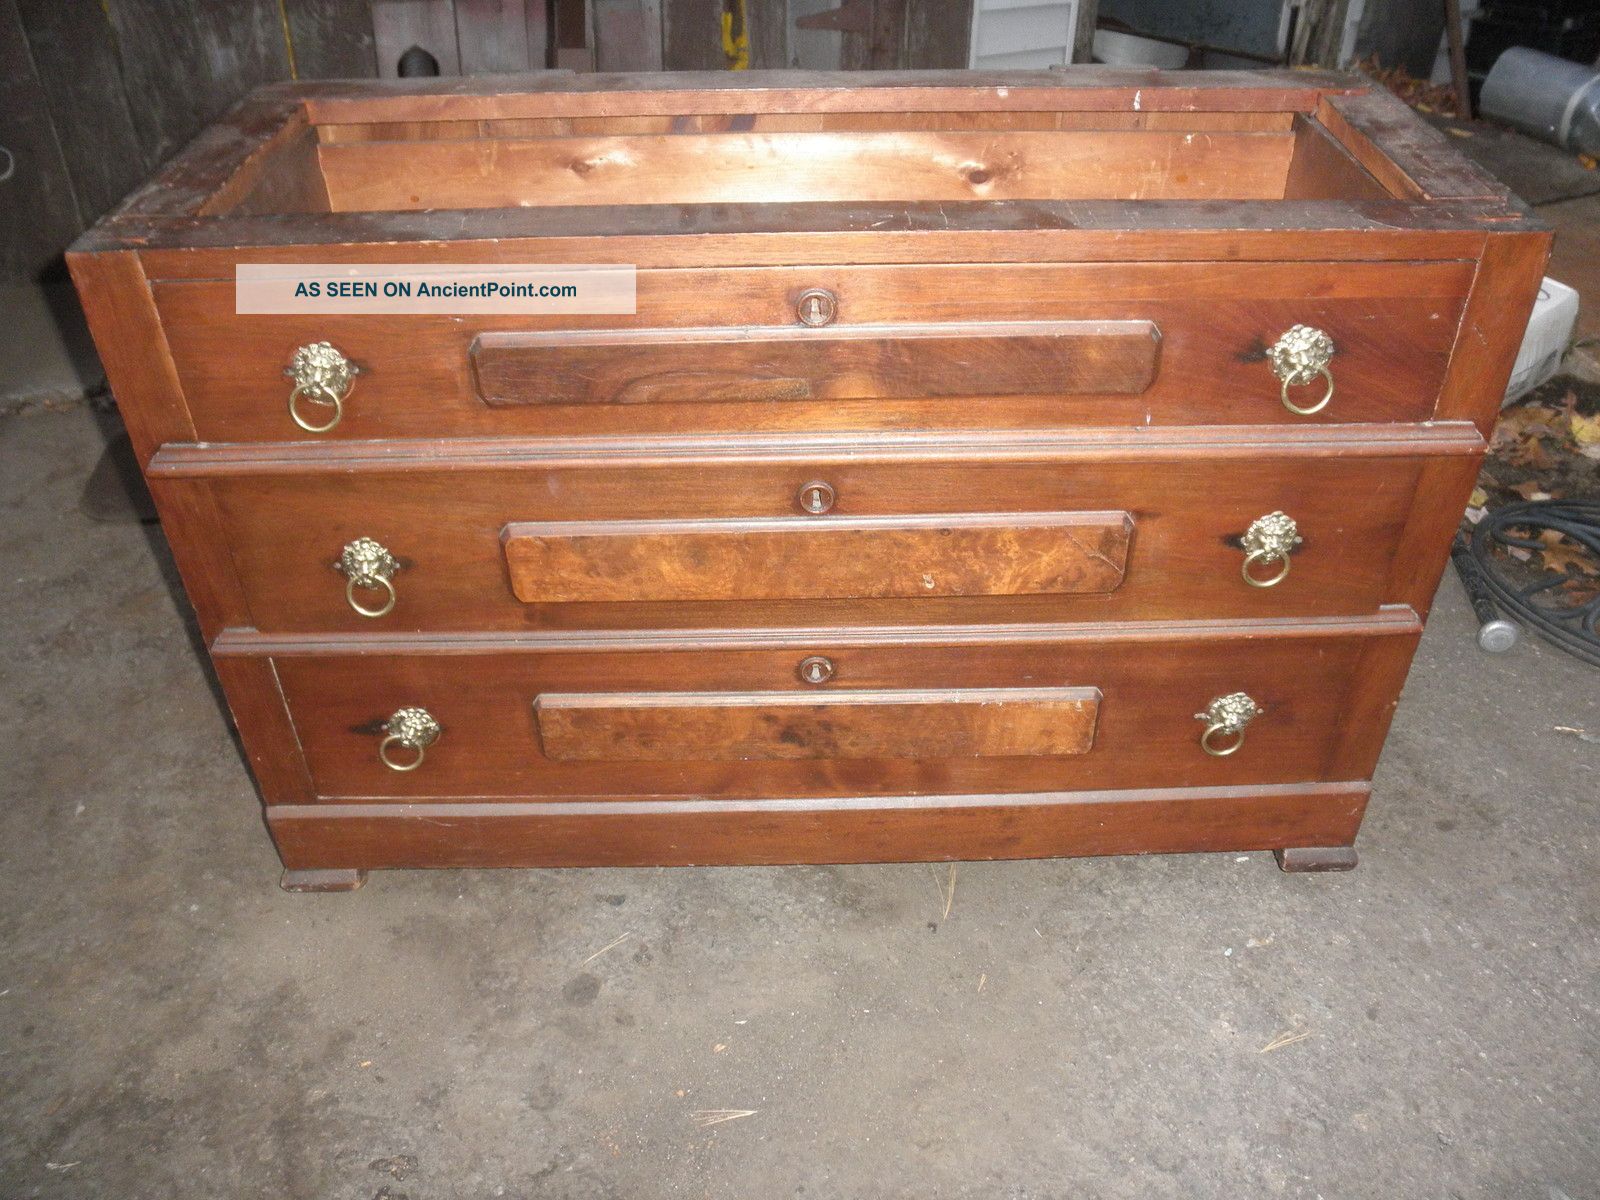 Antique Dresser With Out Top,  Locks On Draws,  Iron Casters,  27 